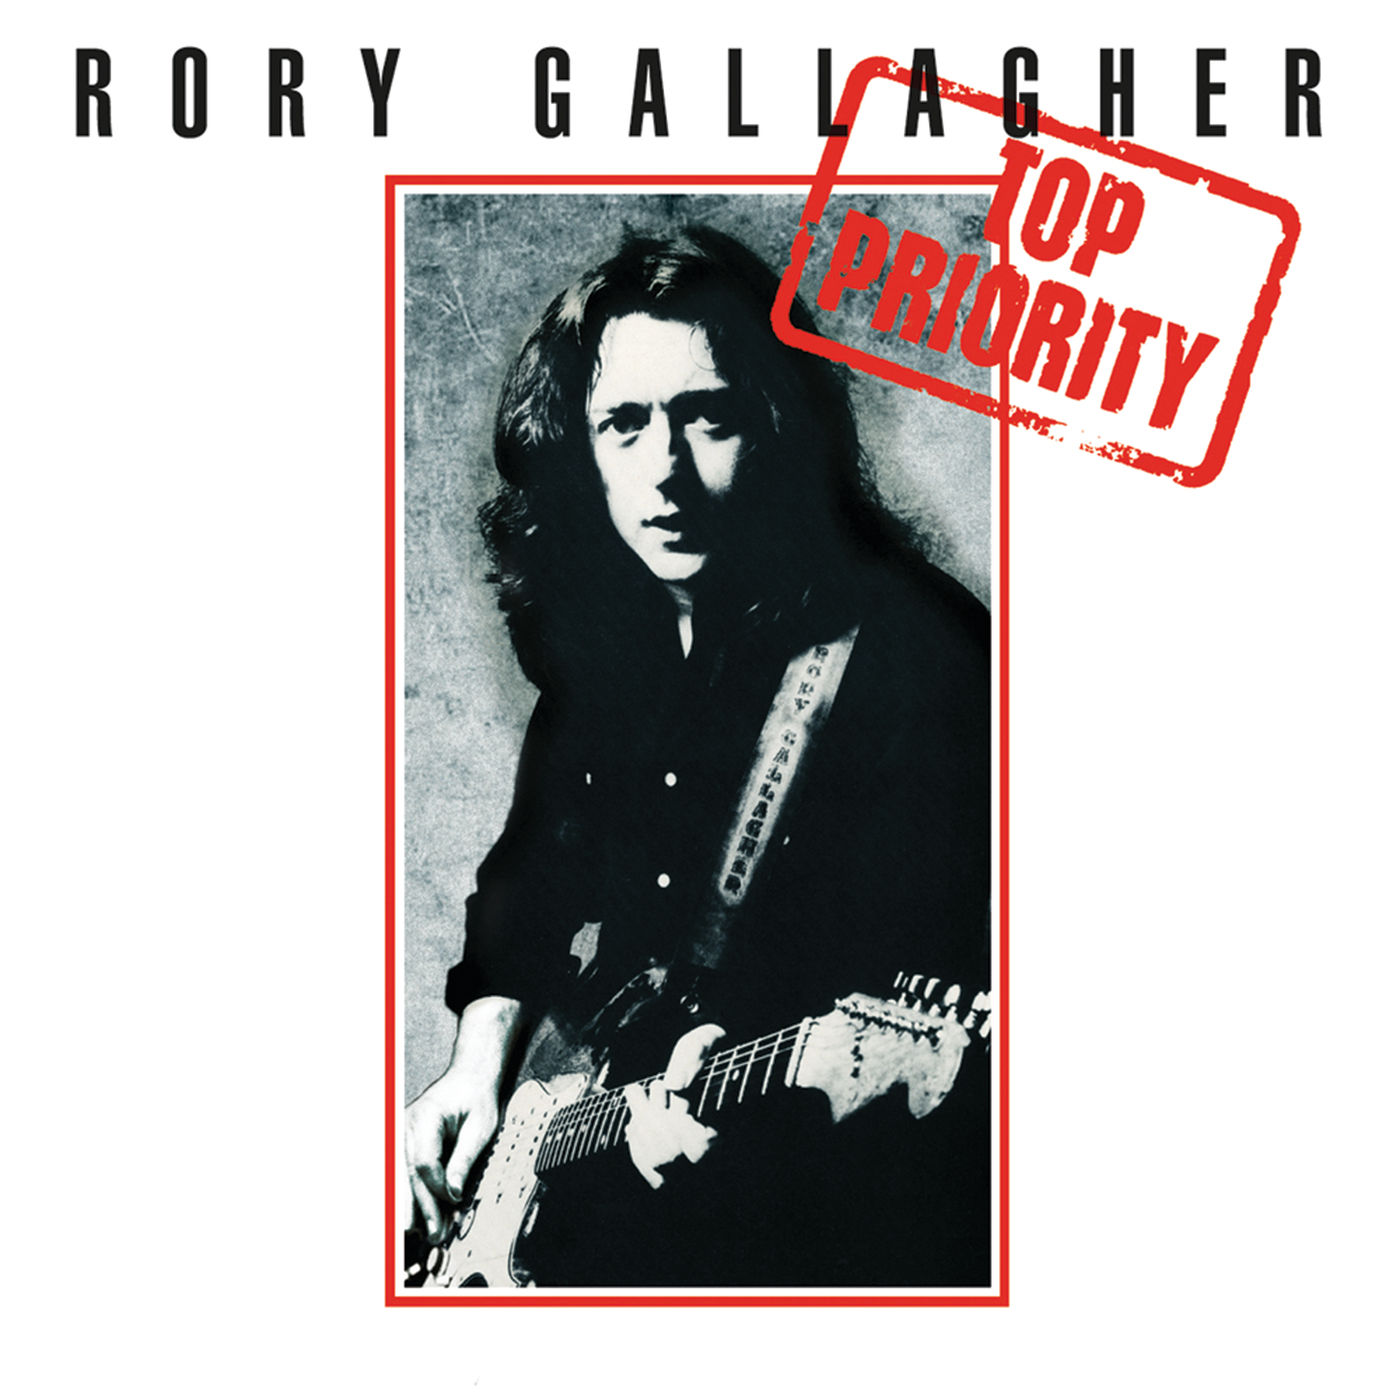 Rory Gallagher - Top Priority (Remastered) (1979/2020) [FLAC 24bit/96kHz]